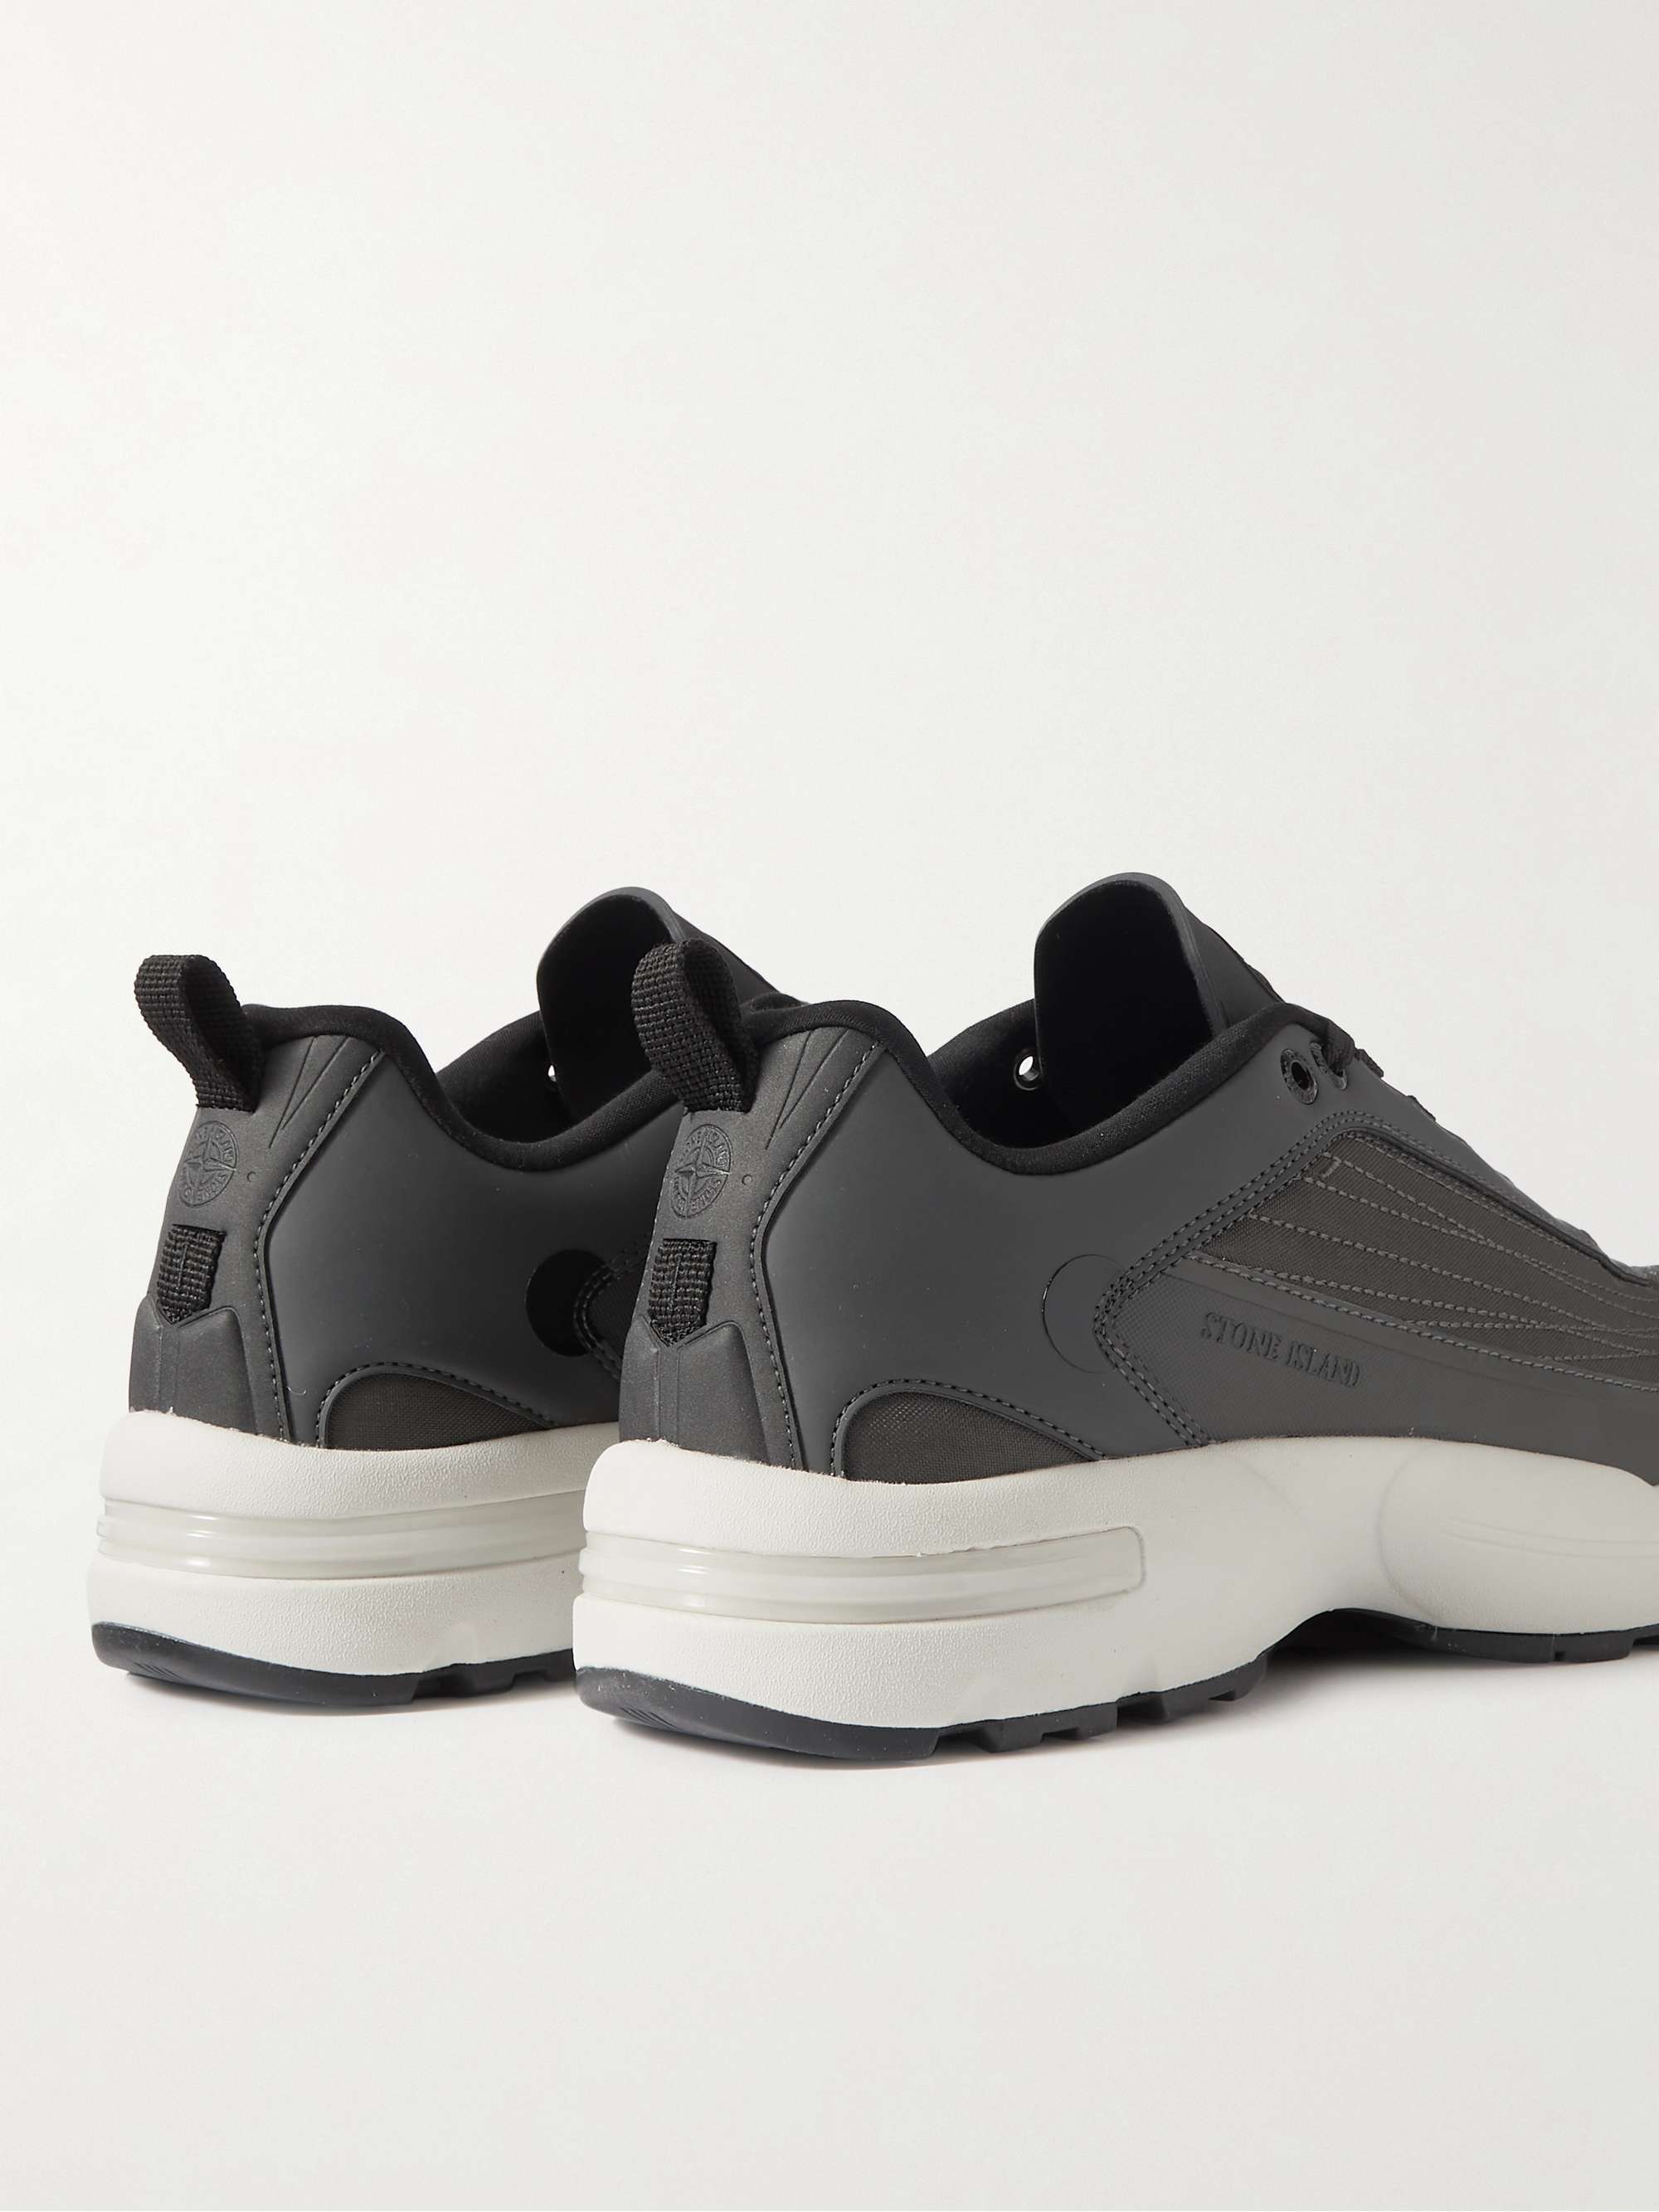 STONE ISLAND Grime Rubber-Trimmed Canvas Sneakers for Men | MR PORTER